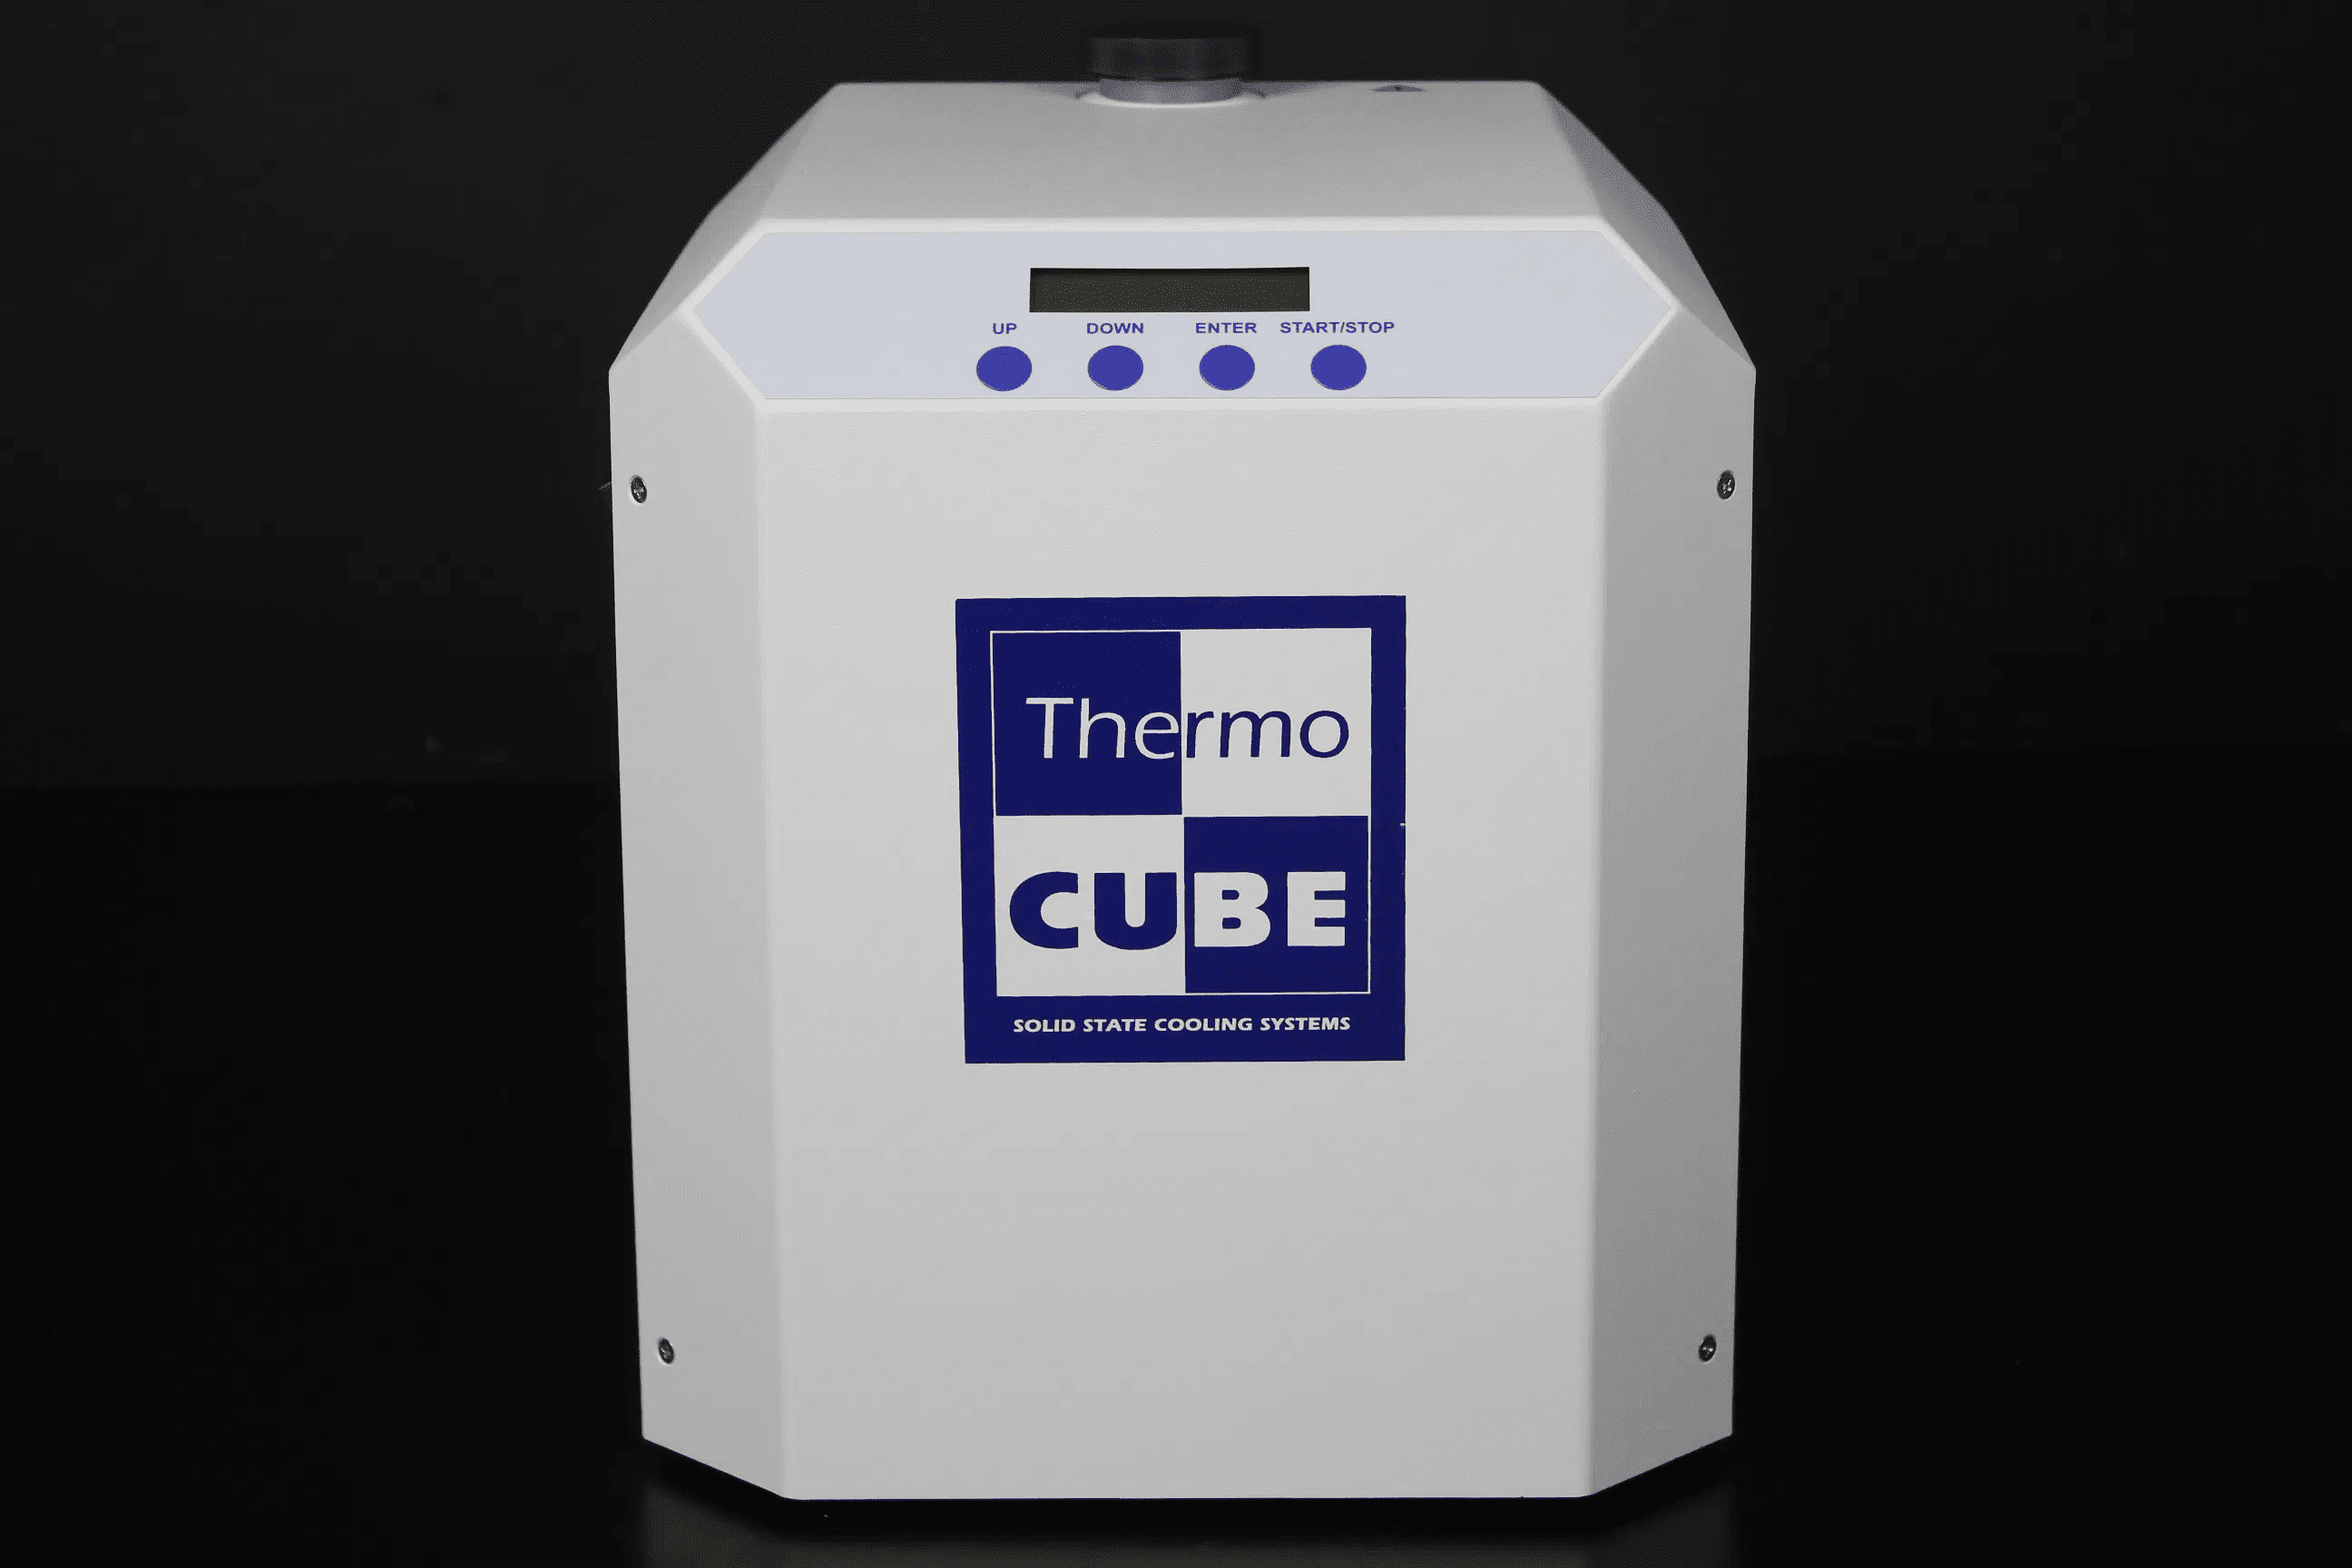 Thermo CUBE - Solid State Cooling Systems